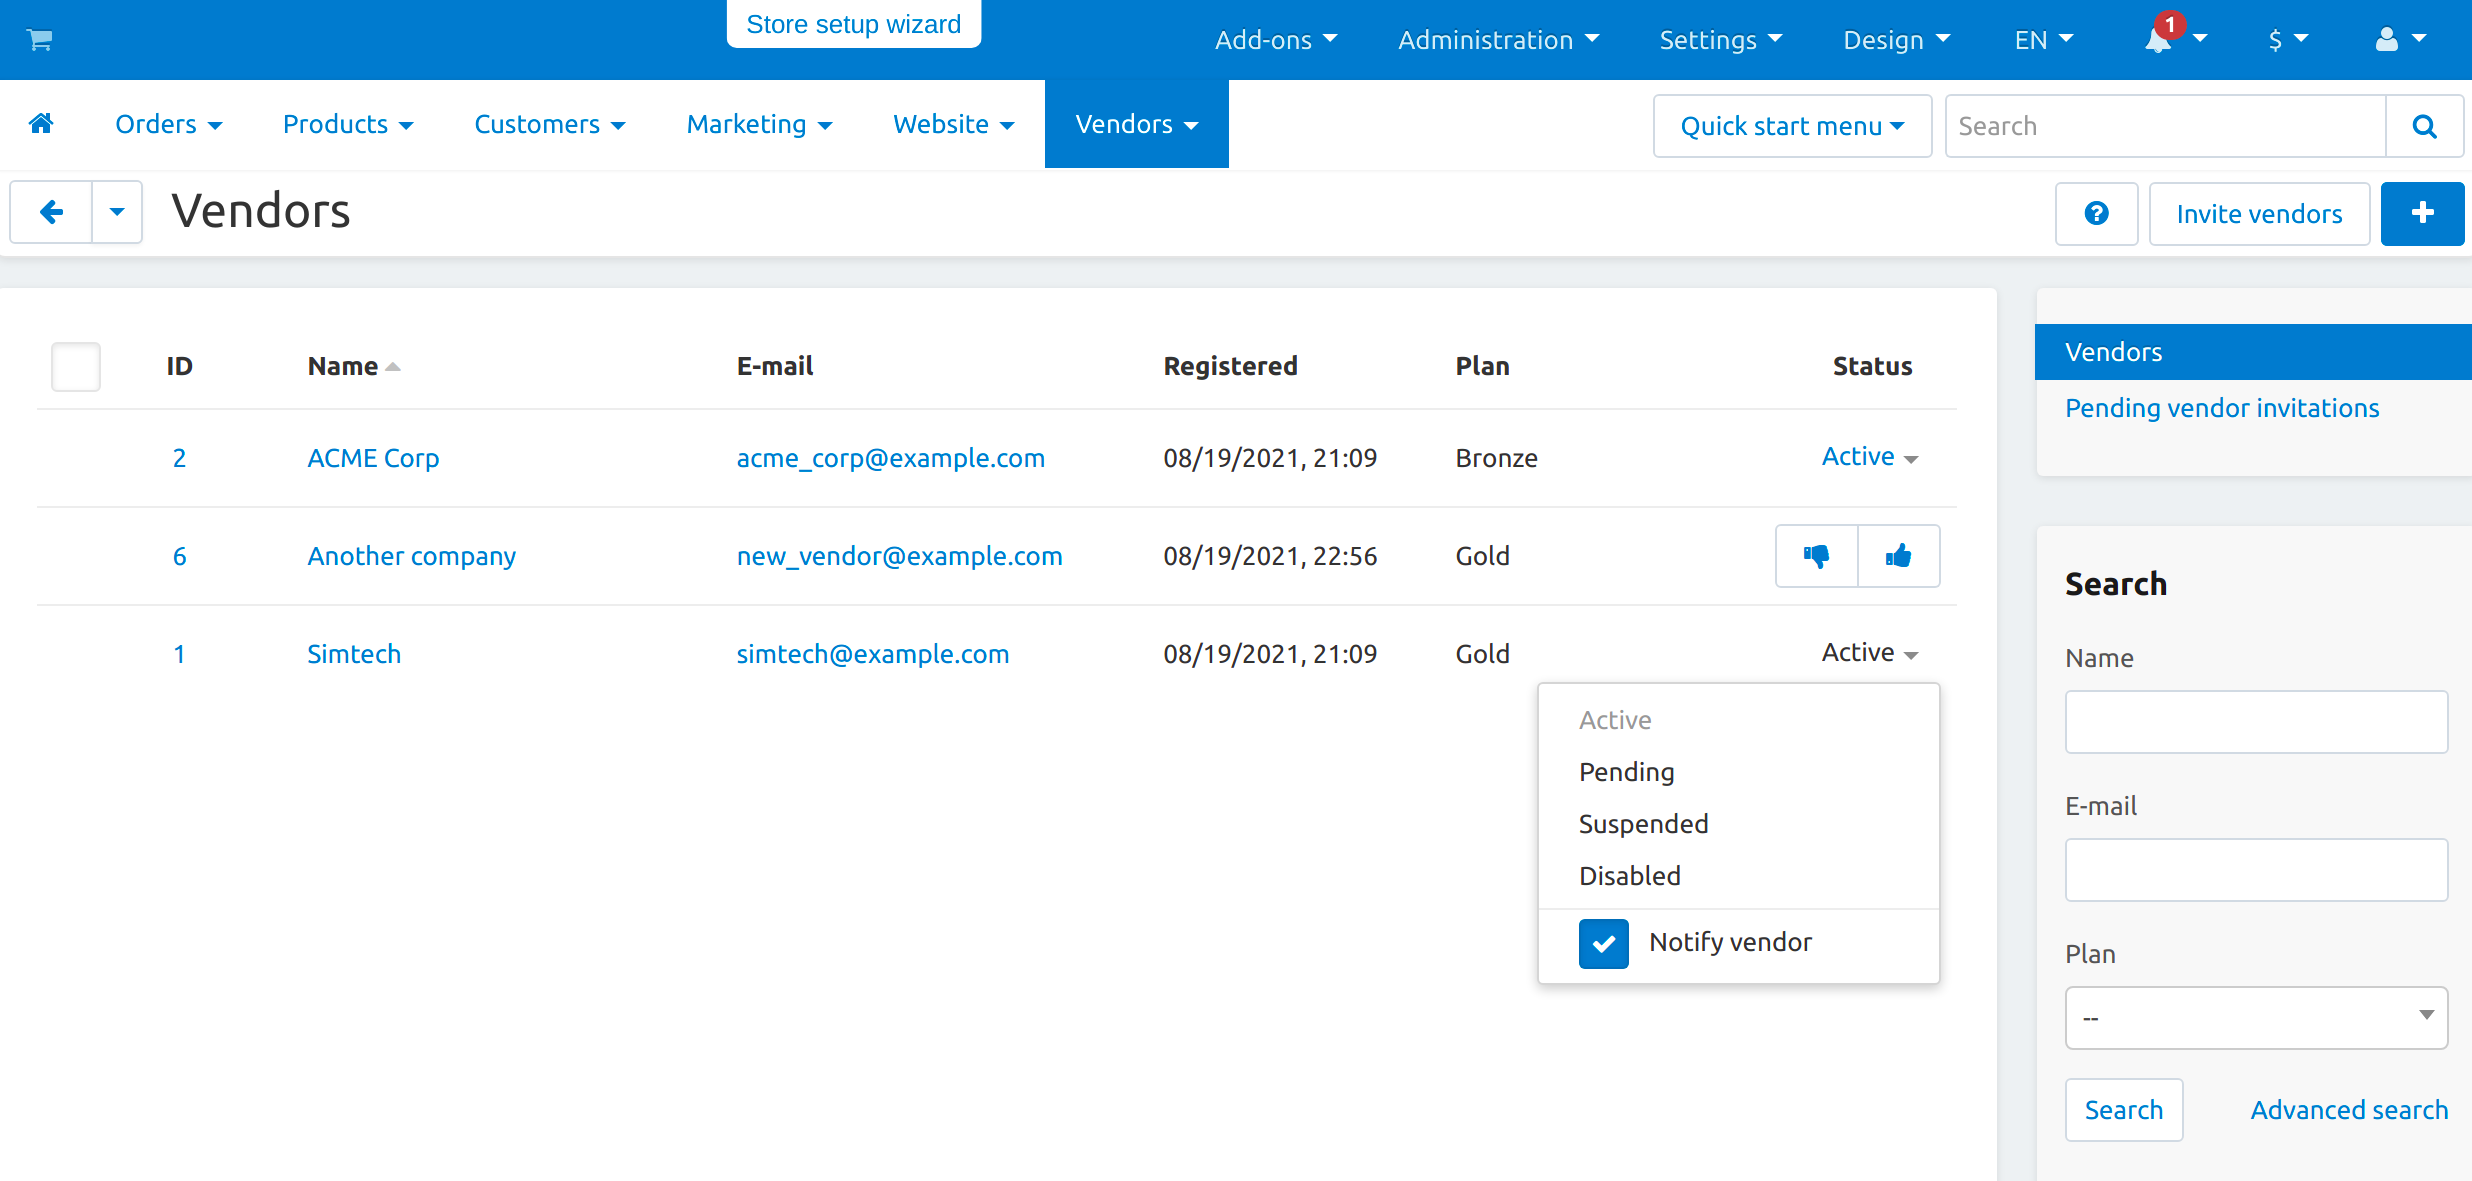 You can change a vendor's status in Multi-Vendor administration panel at any time.